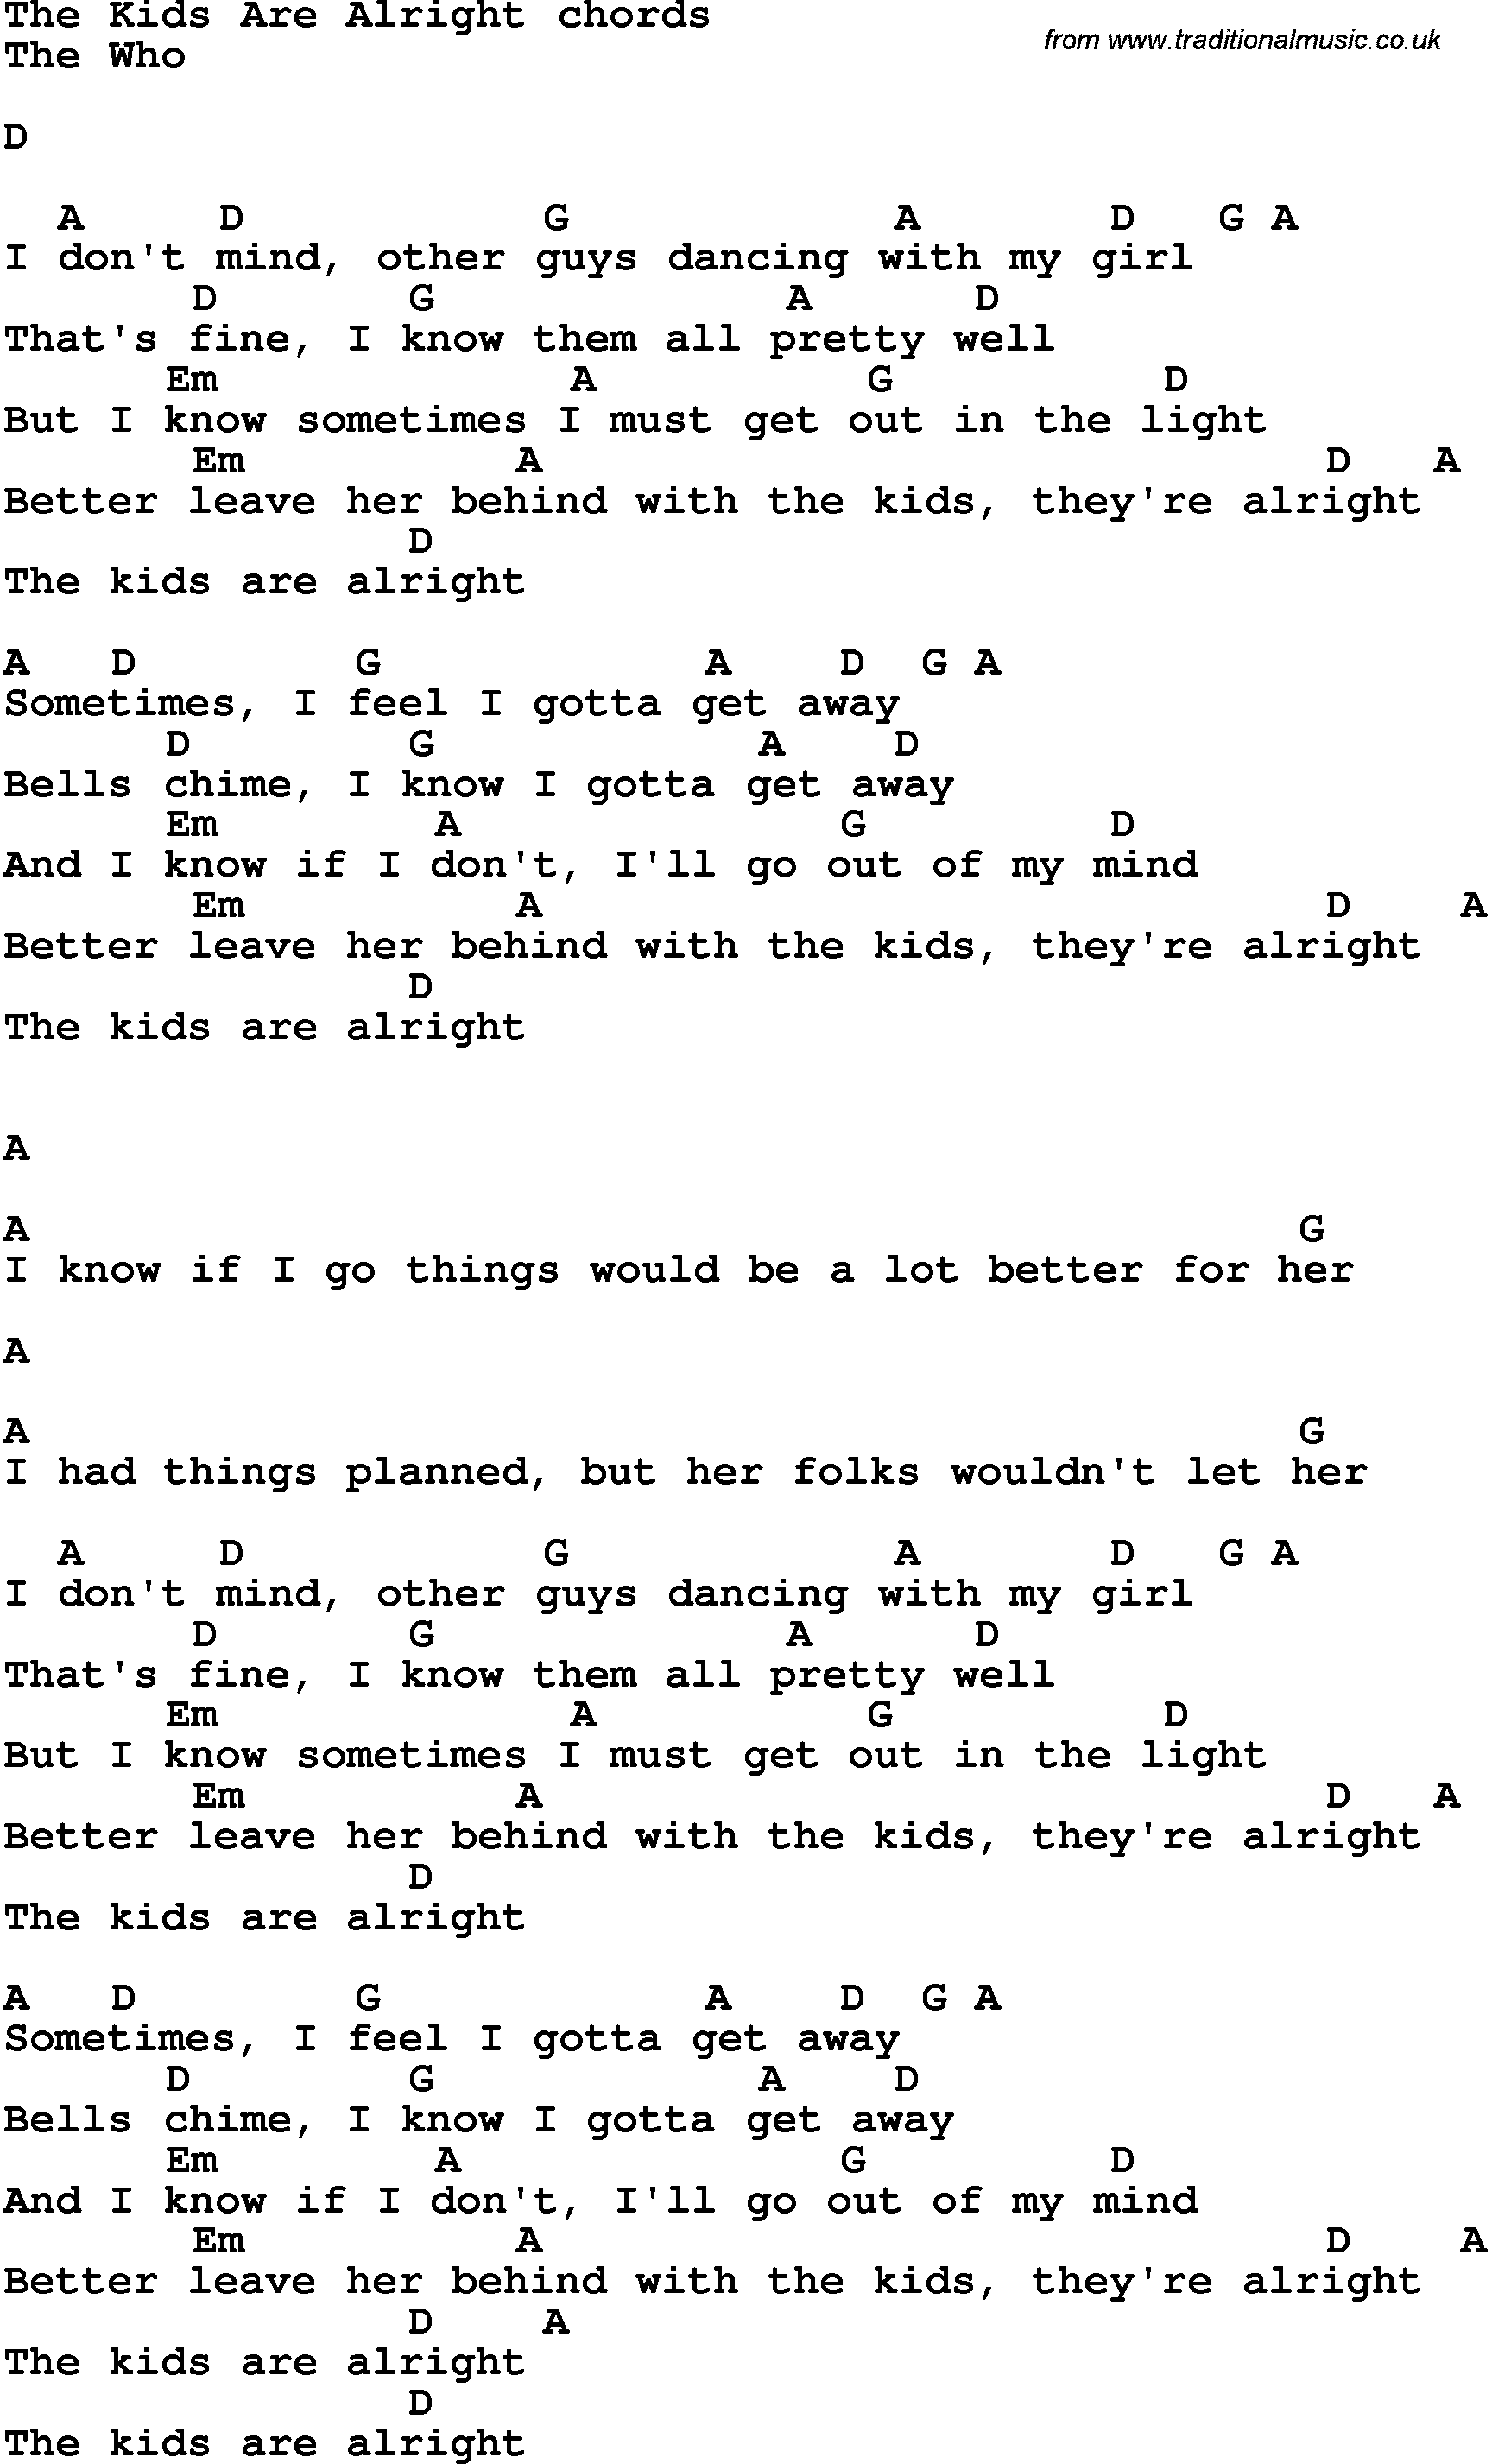 Song Lyrics with guitar chords for The Kids Are Alright